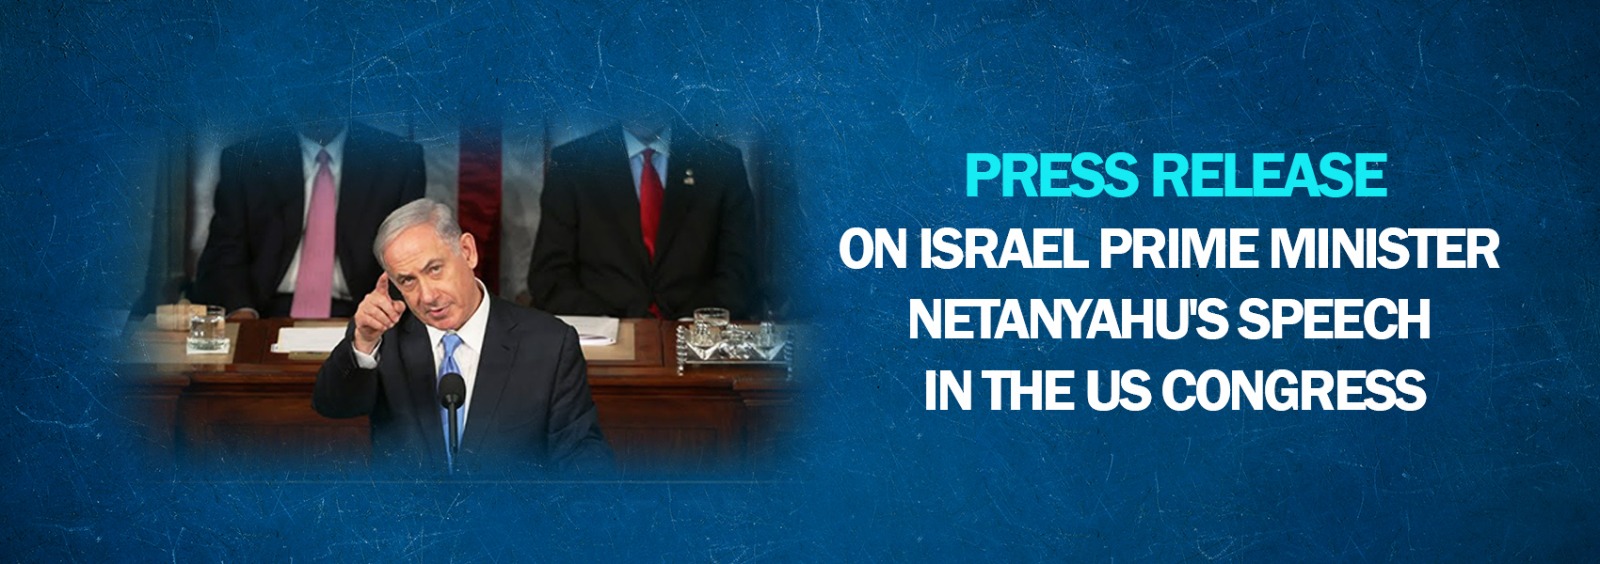 Press Release on Israel Prime Minister Netanyahu's Speech in the US Congress